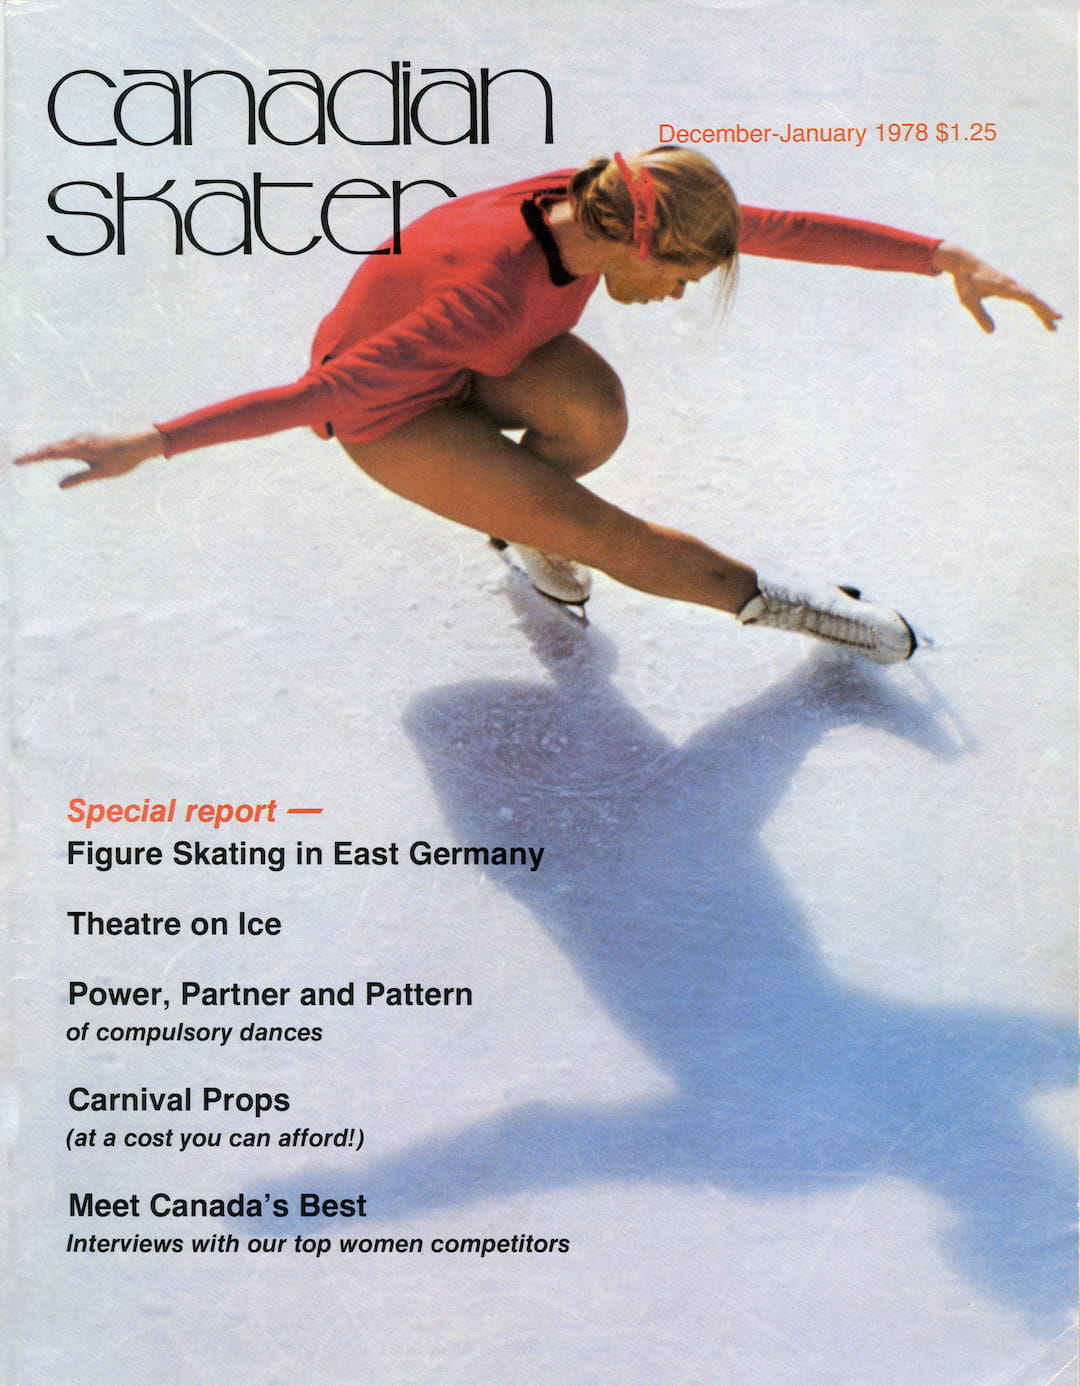 Image of a "Canadian Skater" magazine cover featuring a woman in a red outfit skating on ice.